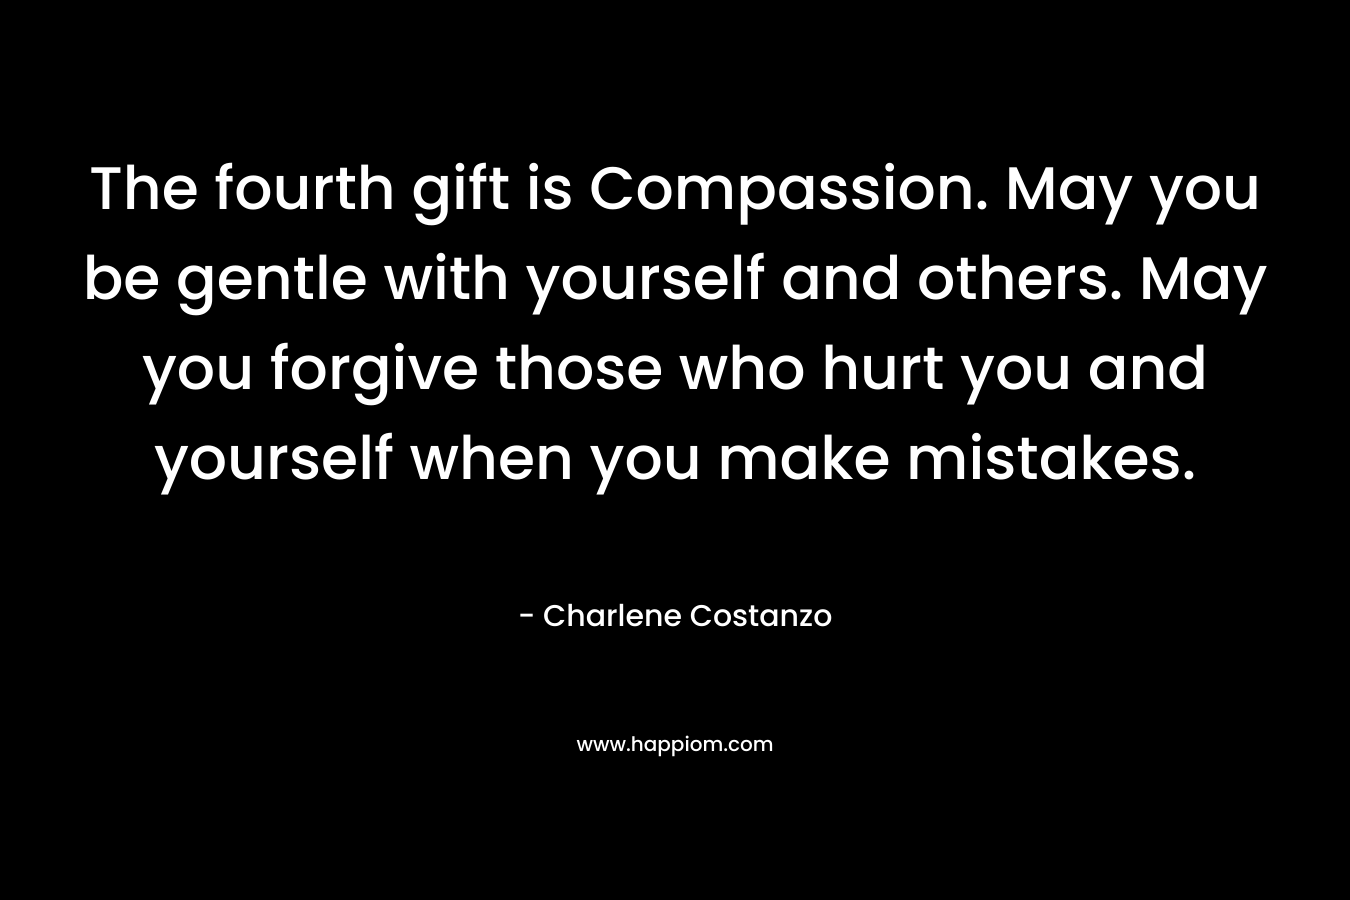 The fourth gift is Compassion. May you be gentle with yourself and others. May you forgive those who hurt you and yourself when you make mistakes.